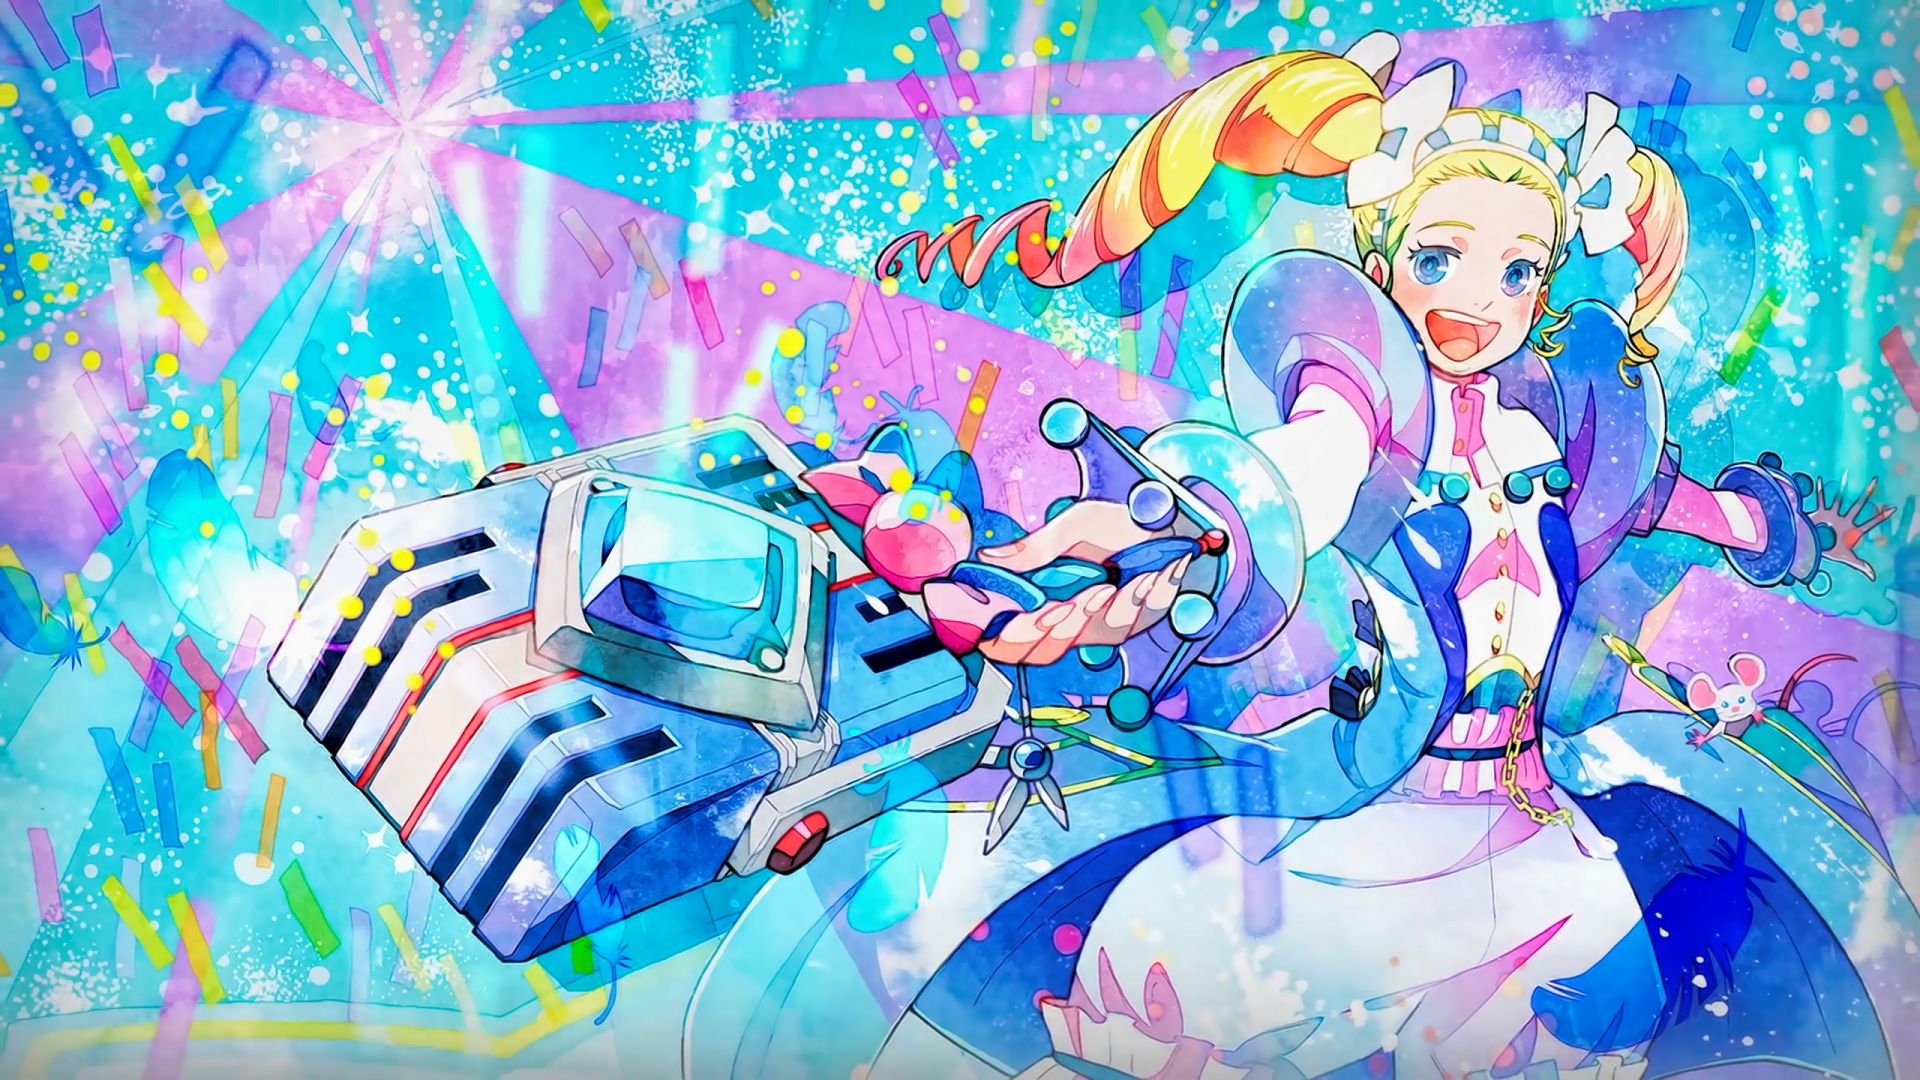 Wallpaper Classicaloid, happy anime girl